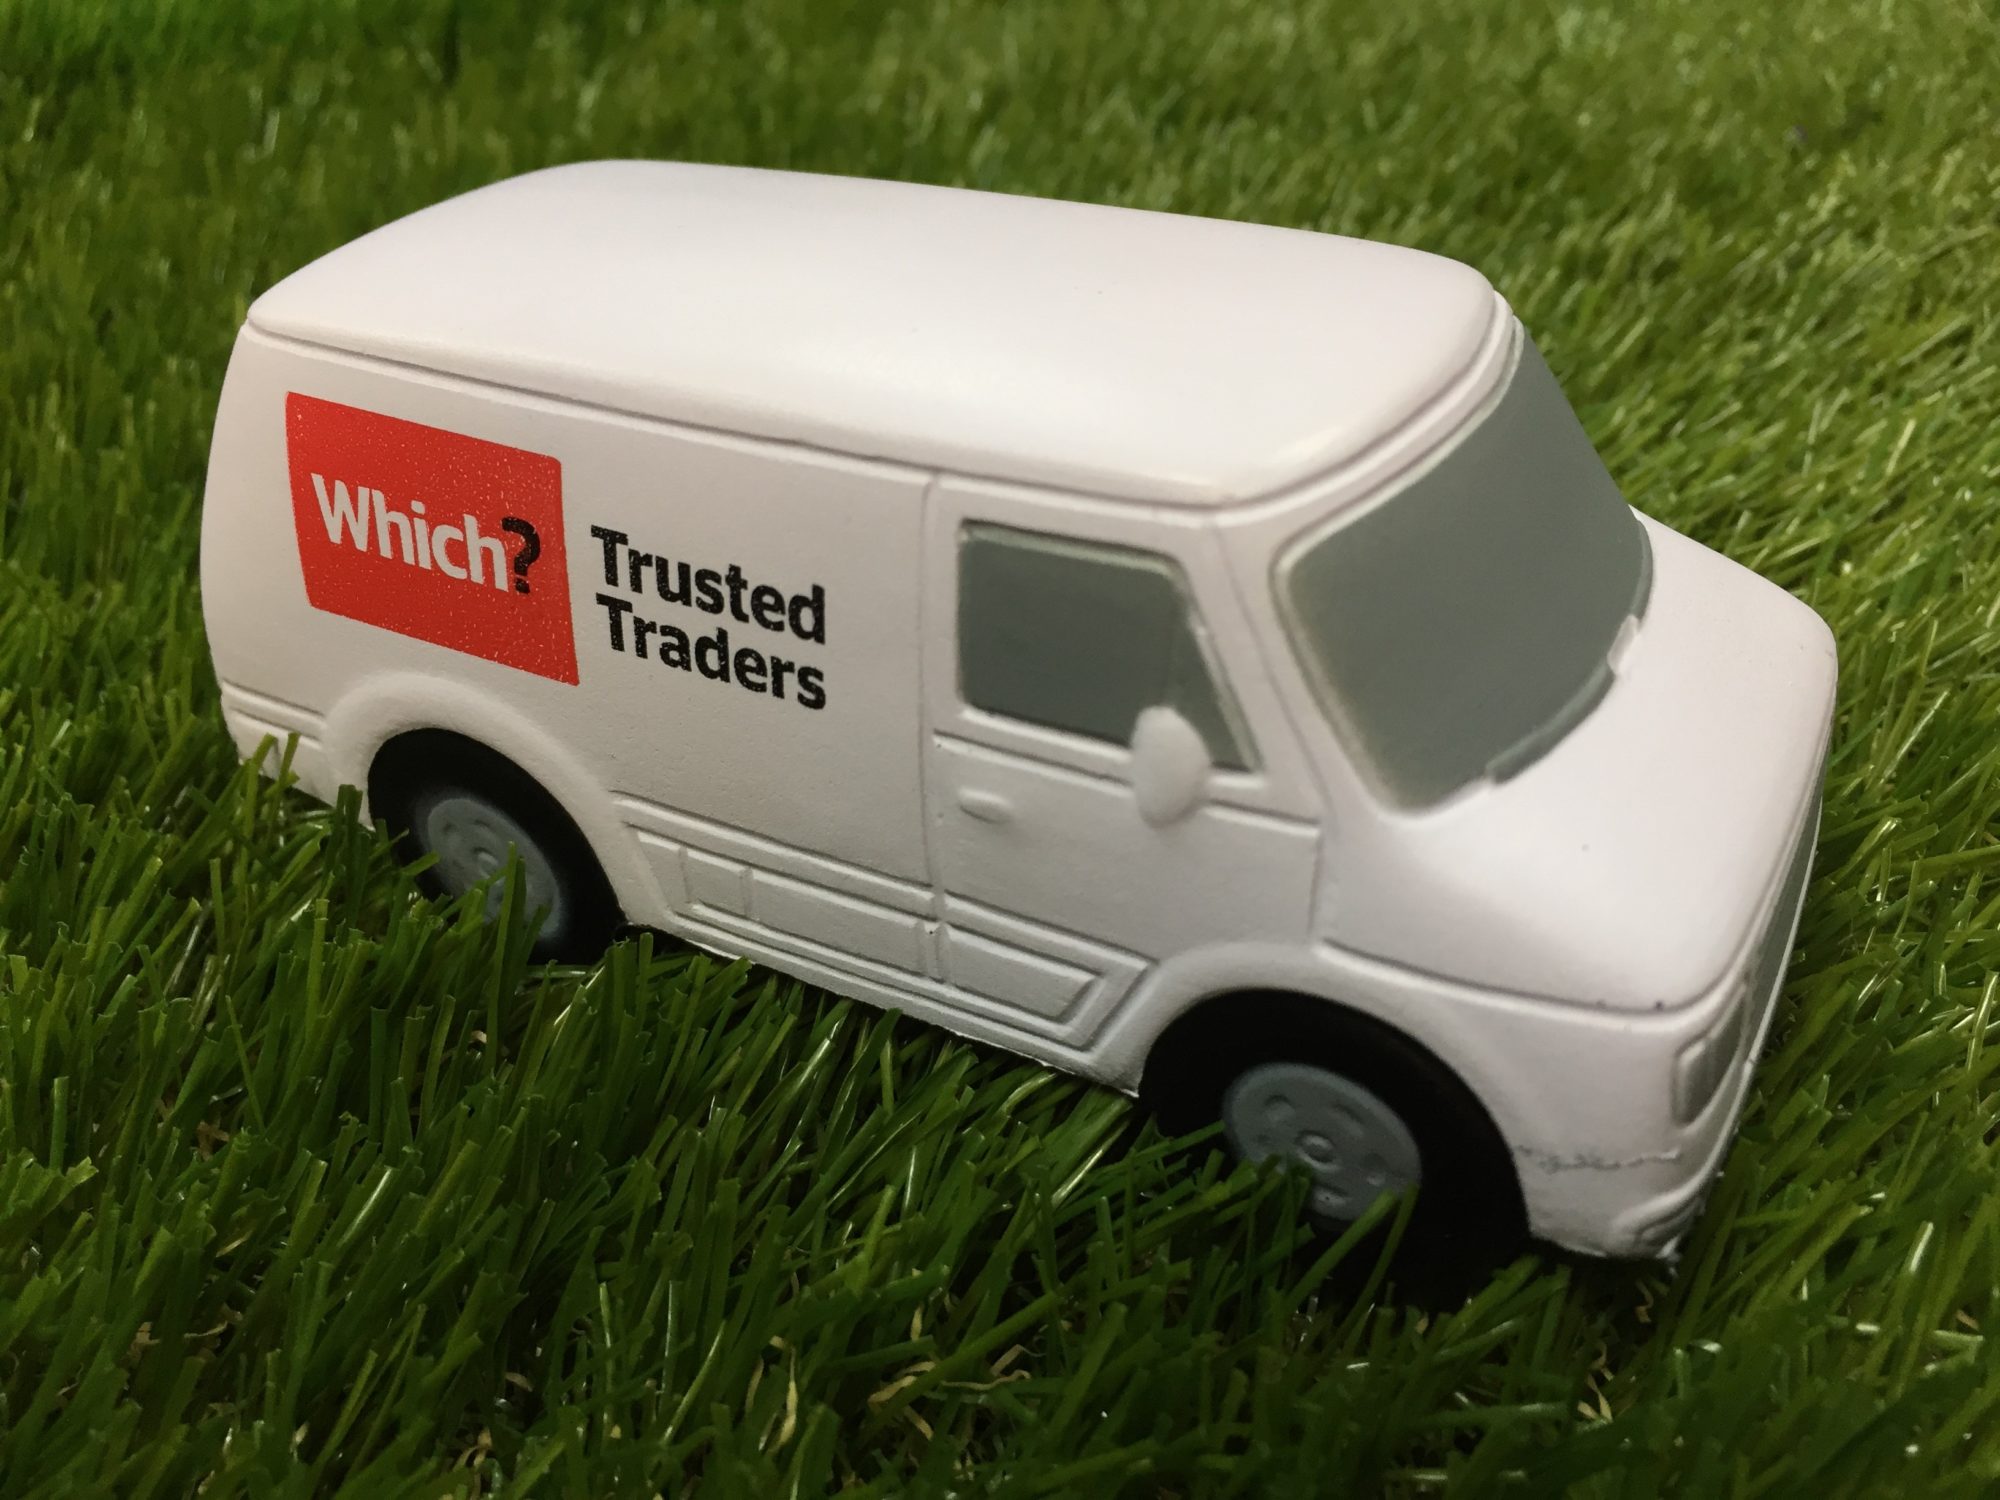 A model van on Artificial Grass showing LazyLawn is a Which? trusted Trader